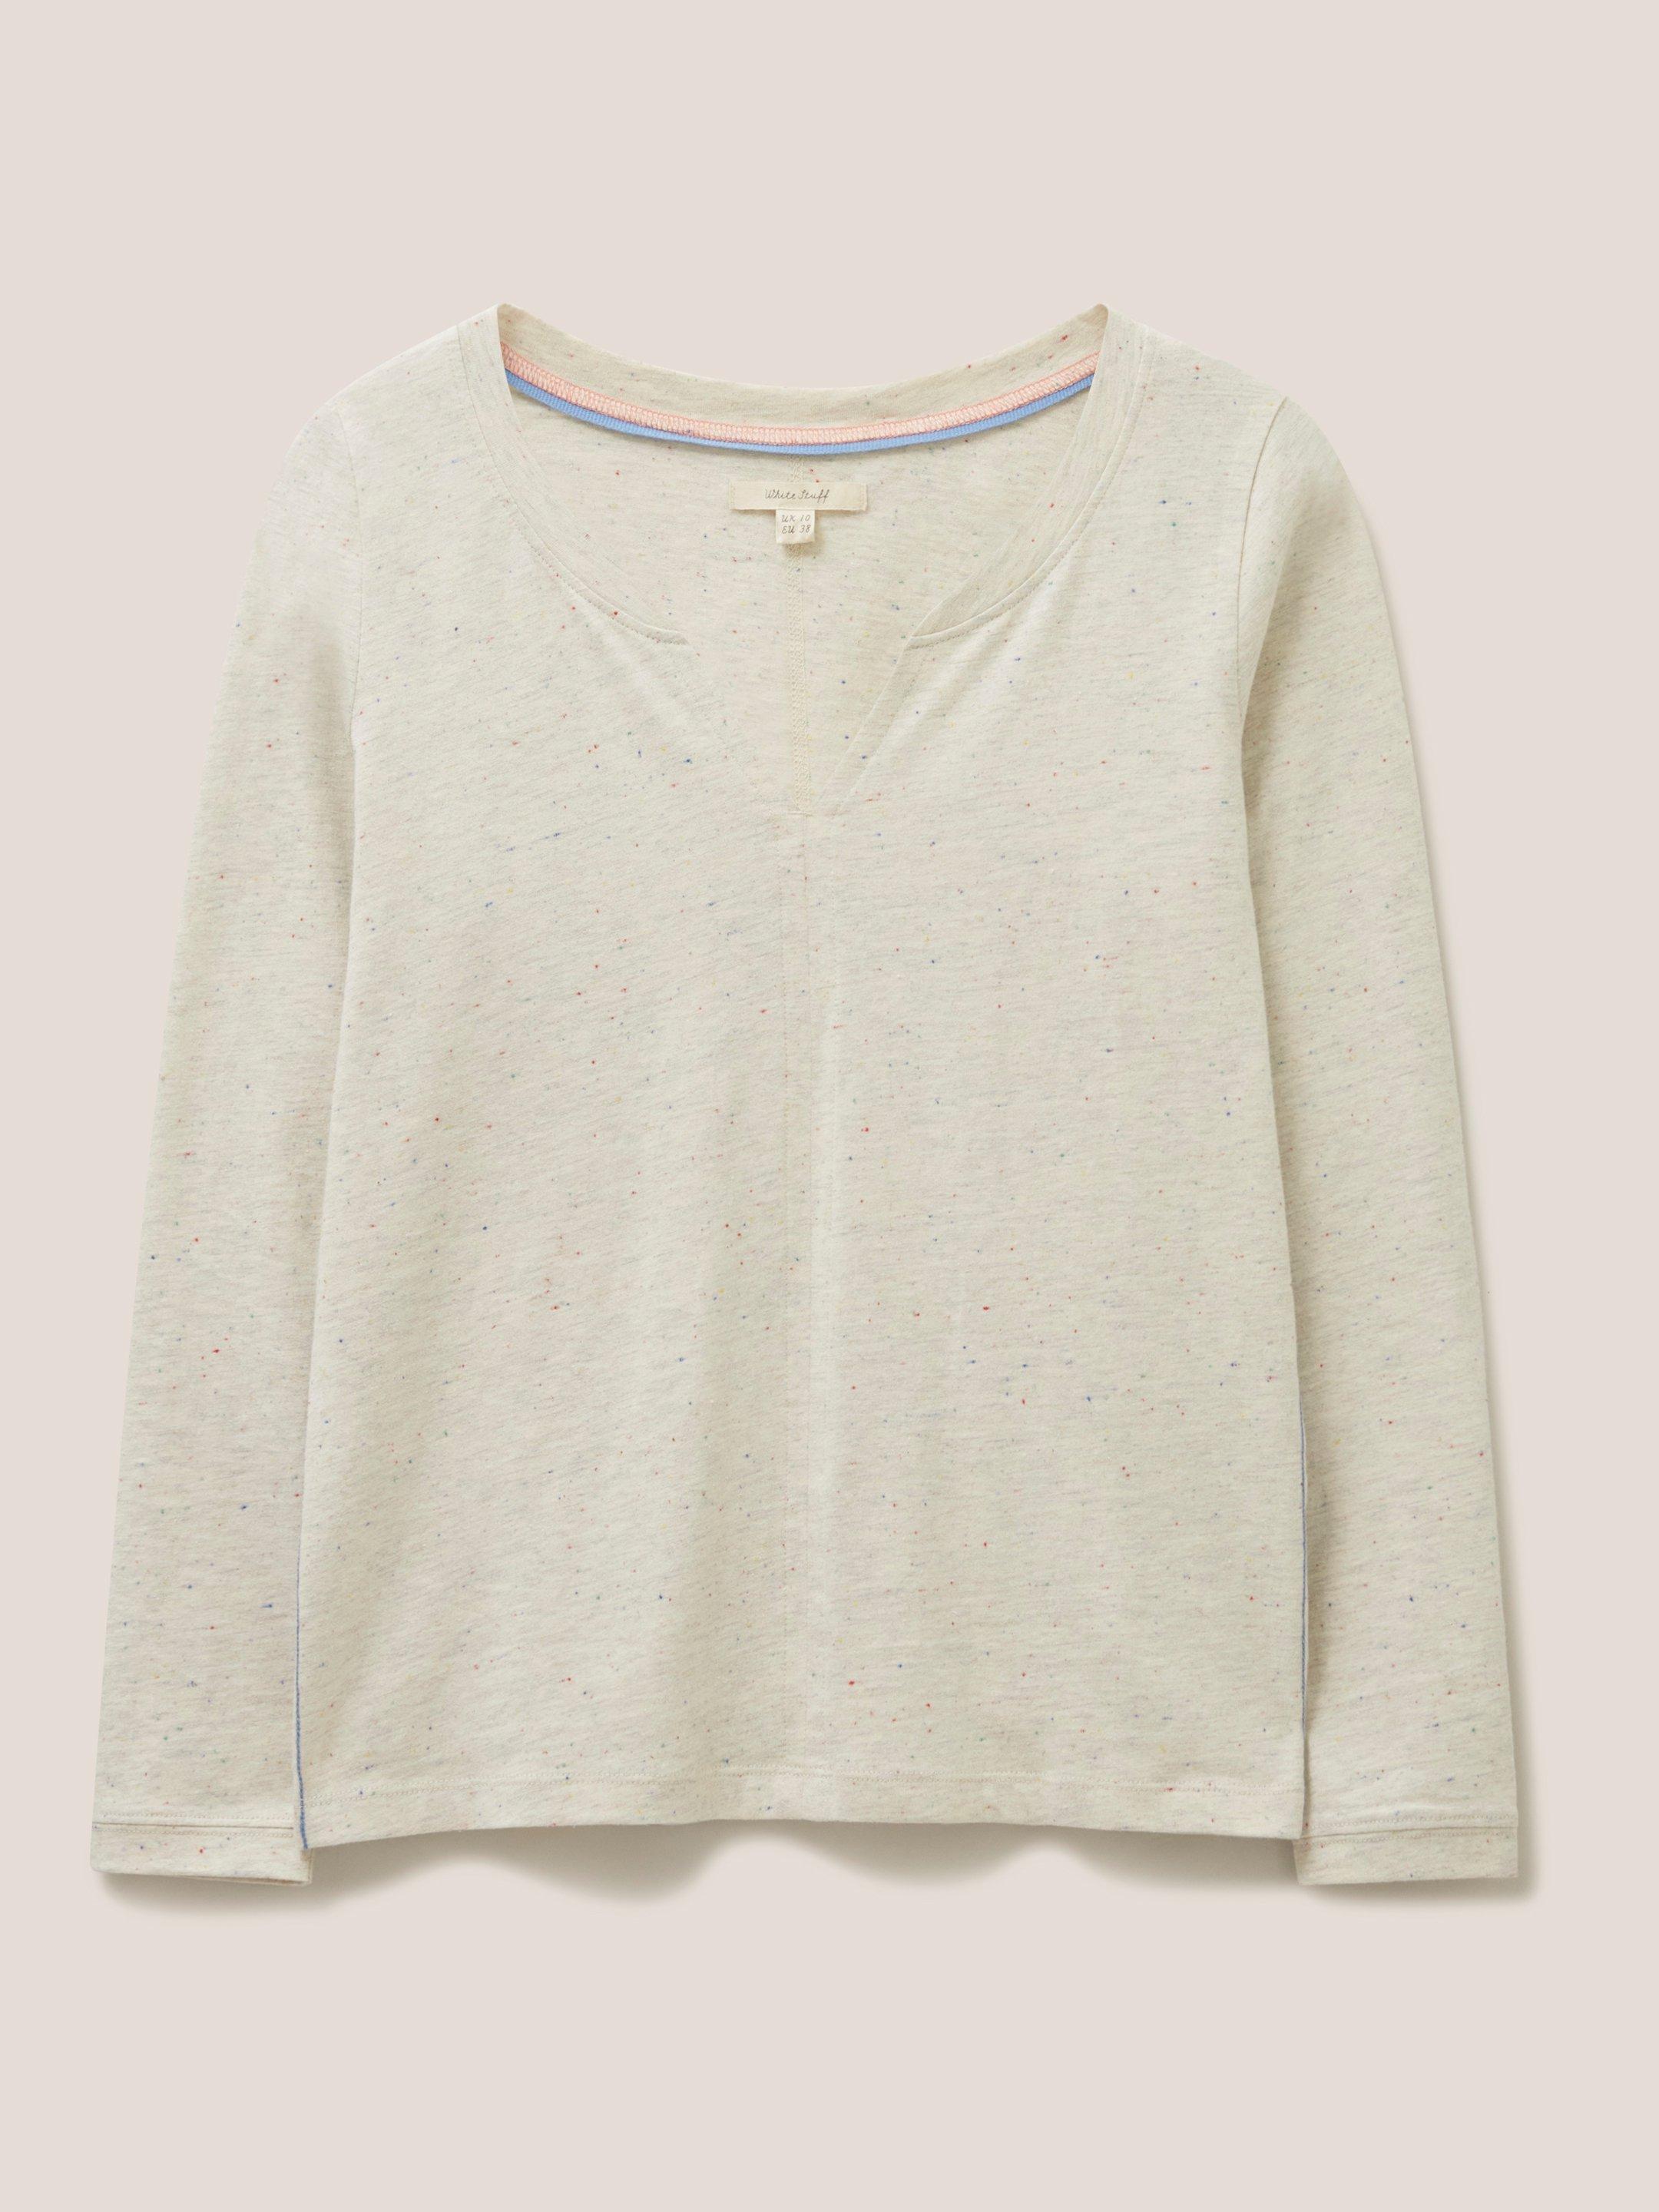 Nelly LS Tee in LGT NAT - FLAT FRONT